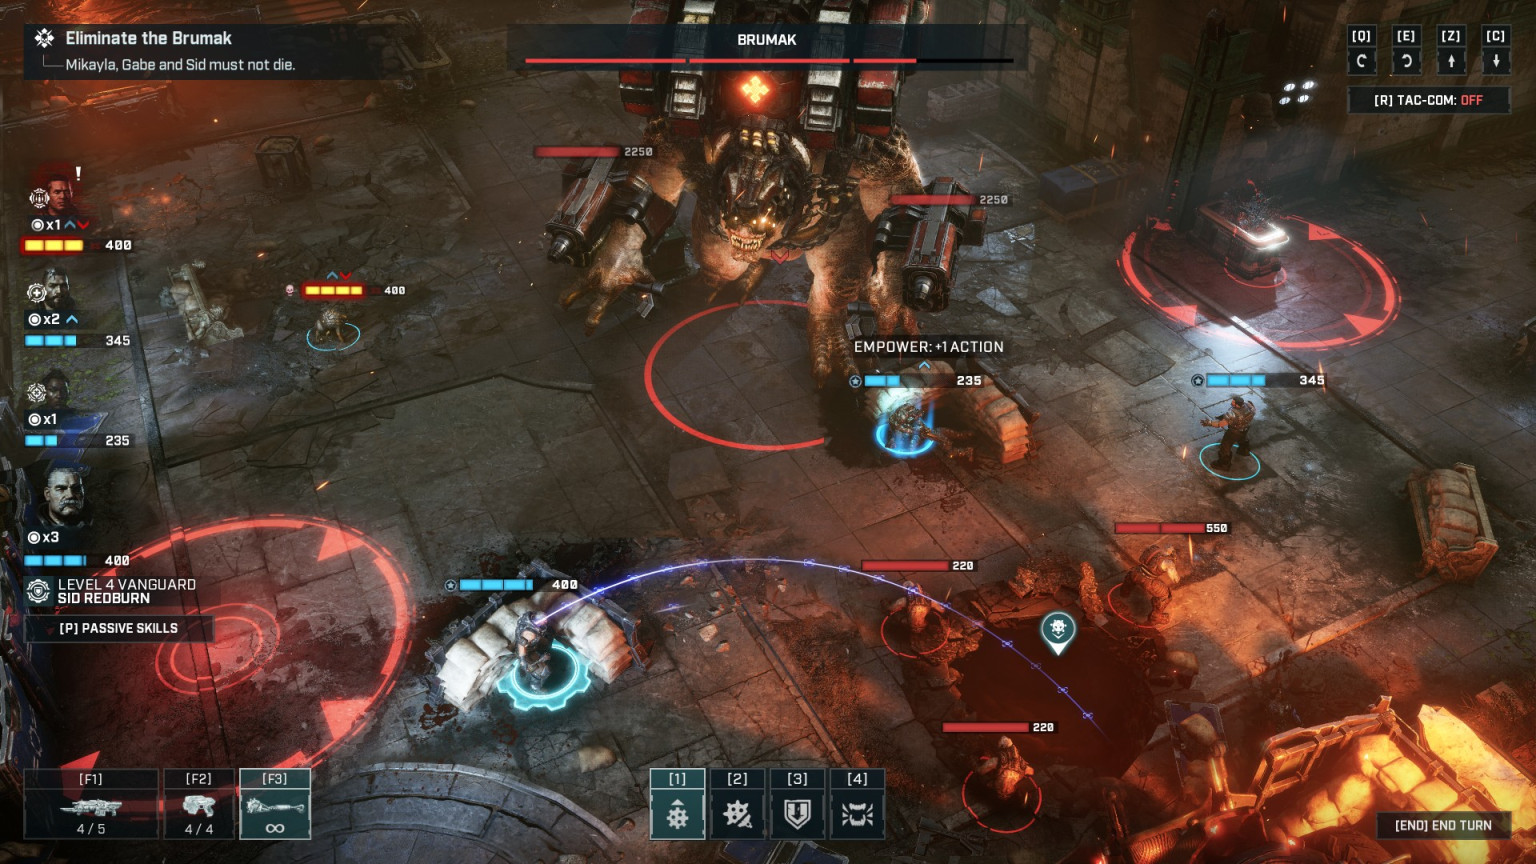 The middle of a battle between players and a tank in Gears Tactics